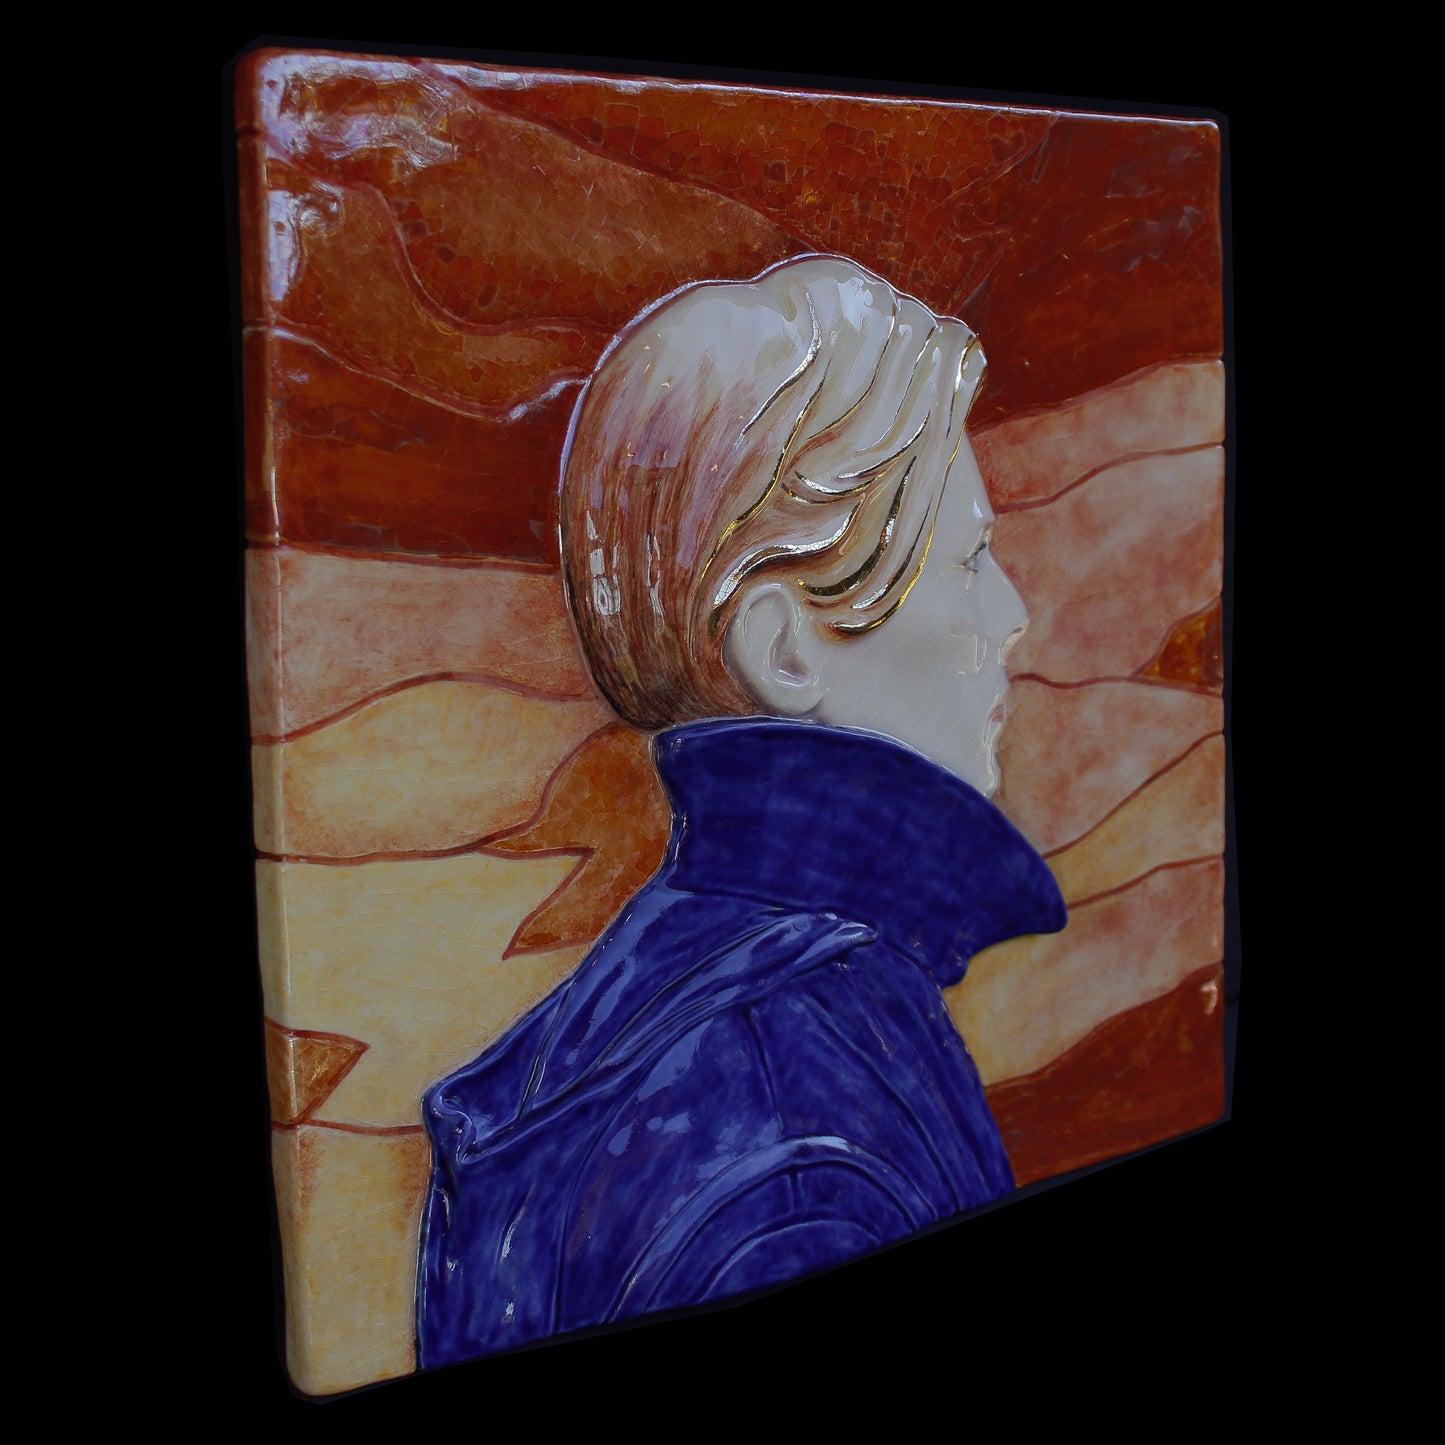 David Bowie - 3D 'Low' Wall Panel Sculpture Painted Ceramic